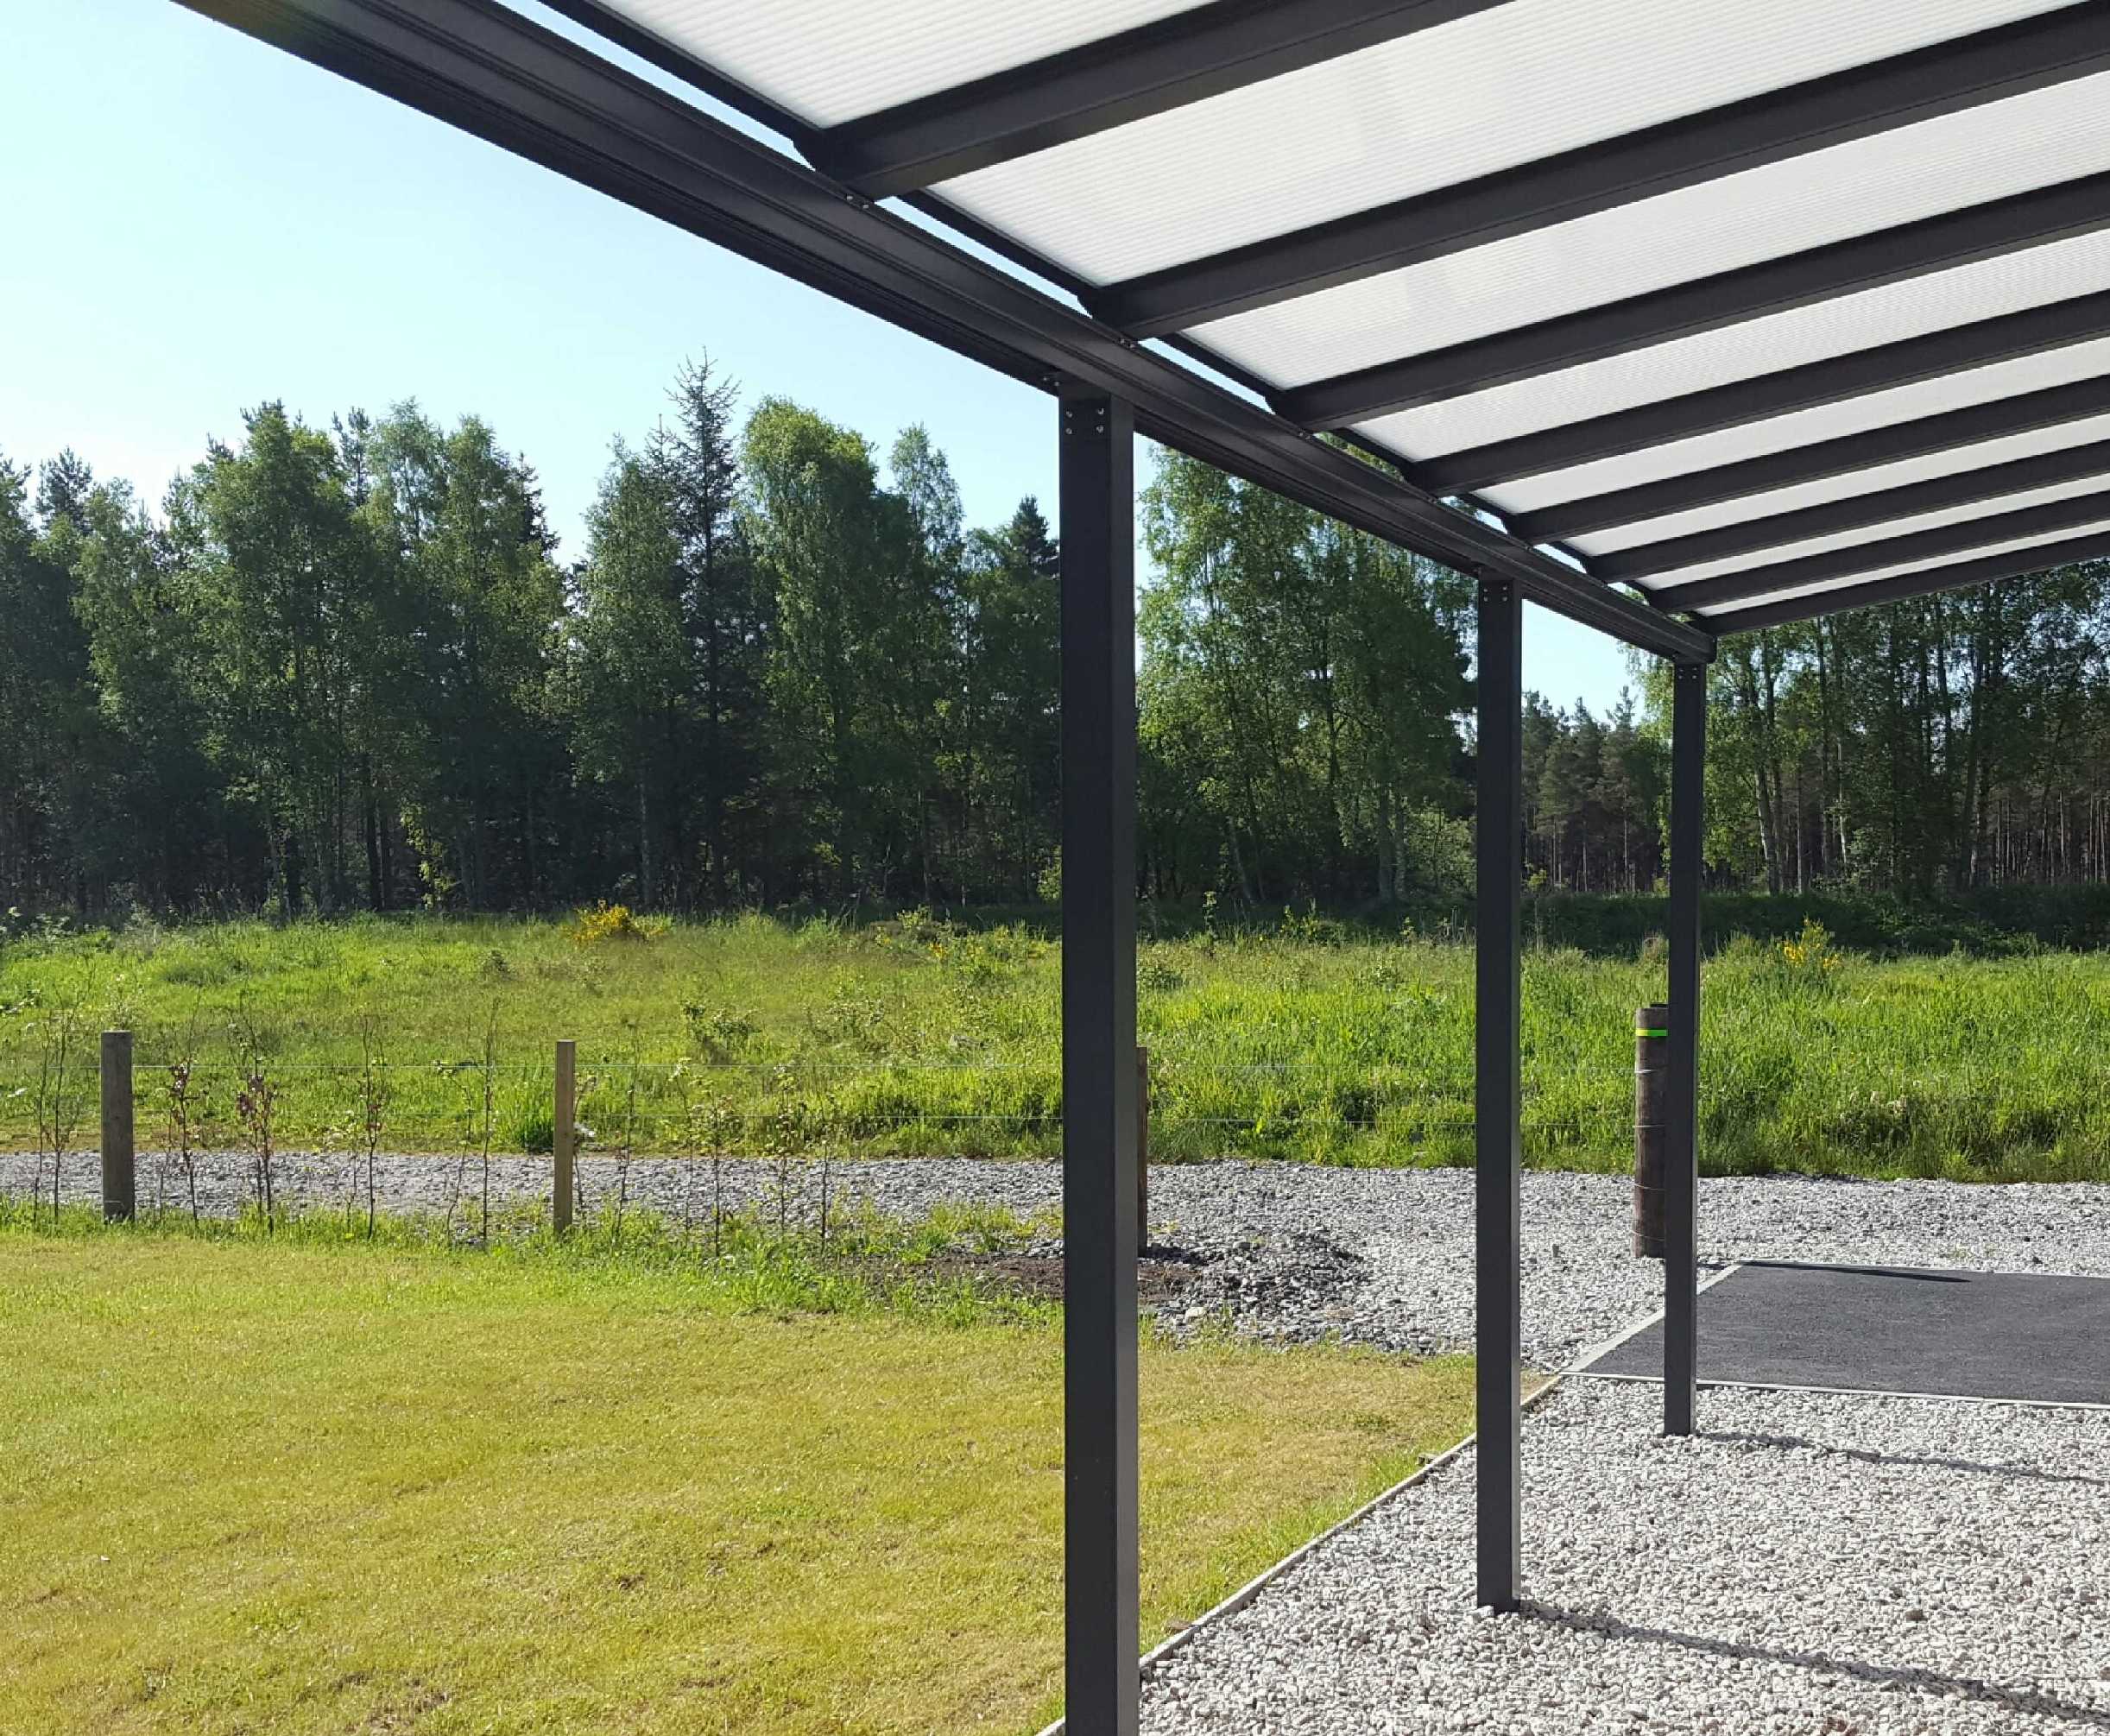 Omega Smart Lean-To Canopy, Anthracite Grey, 6mm Glass Clear Plate Polycarbonate Glazing - 9.8m (W) x 3.0m (P), (5) Supporting Posts